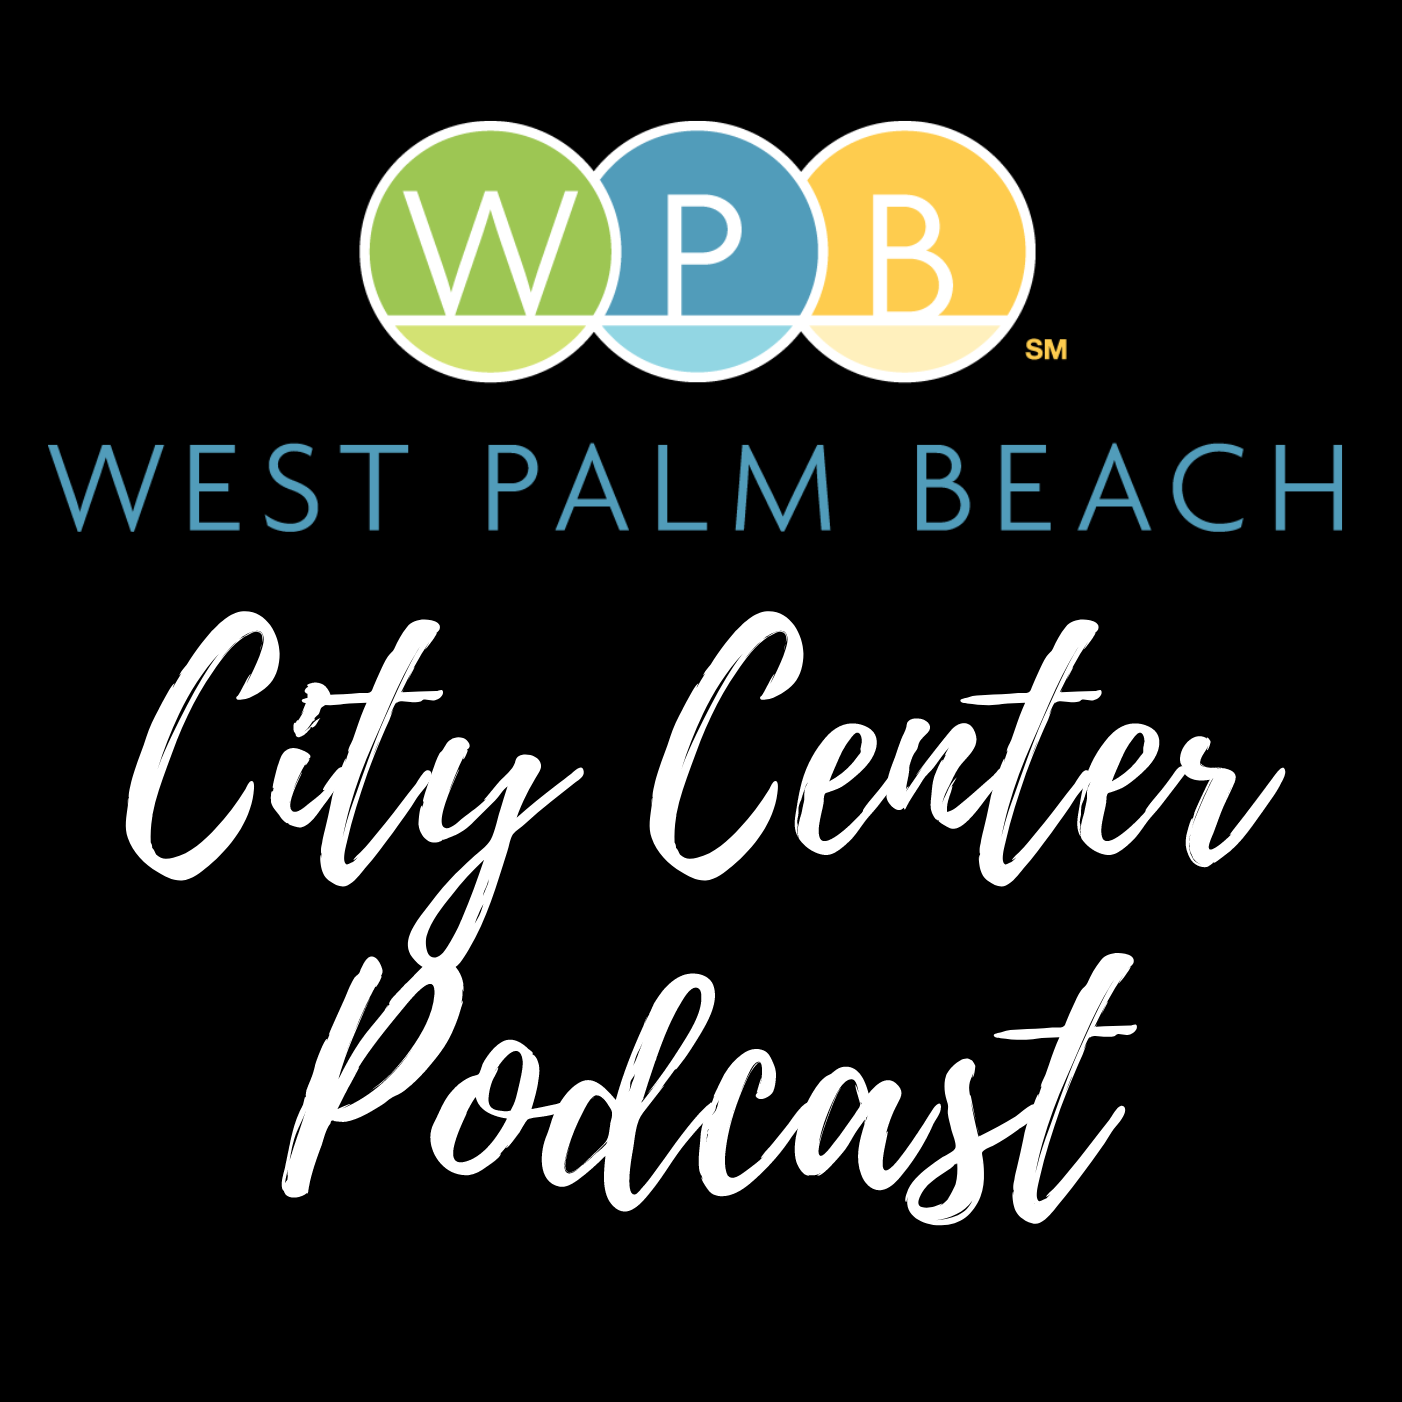 City Center Podcast from West Palm Beach, Florida